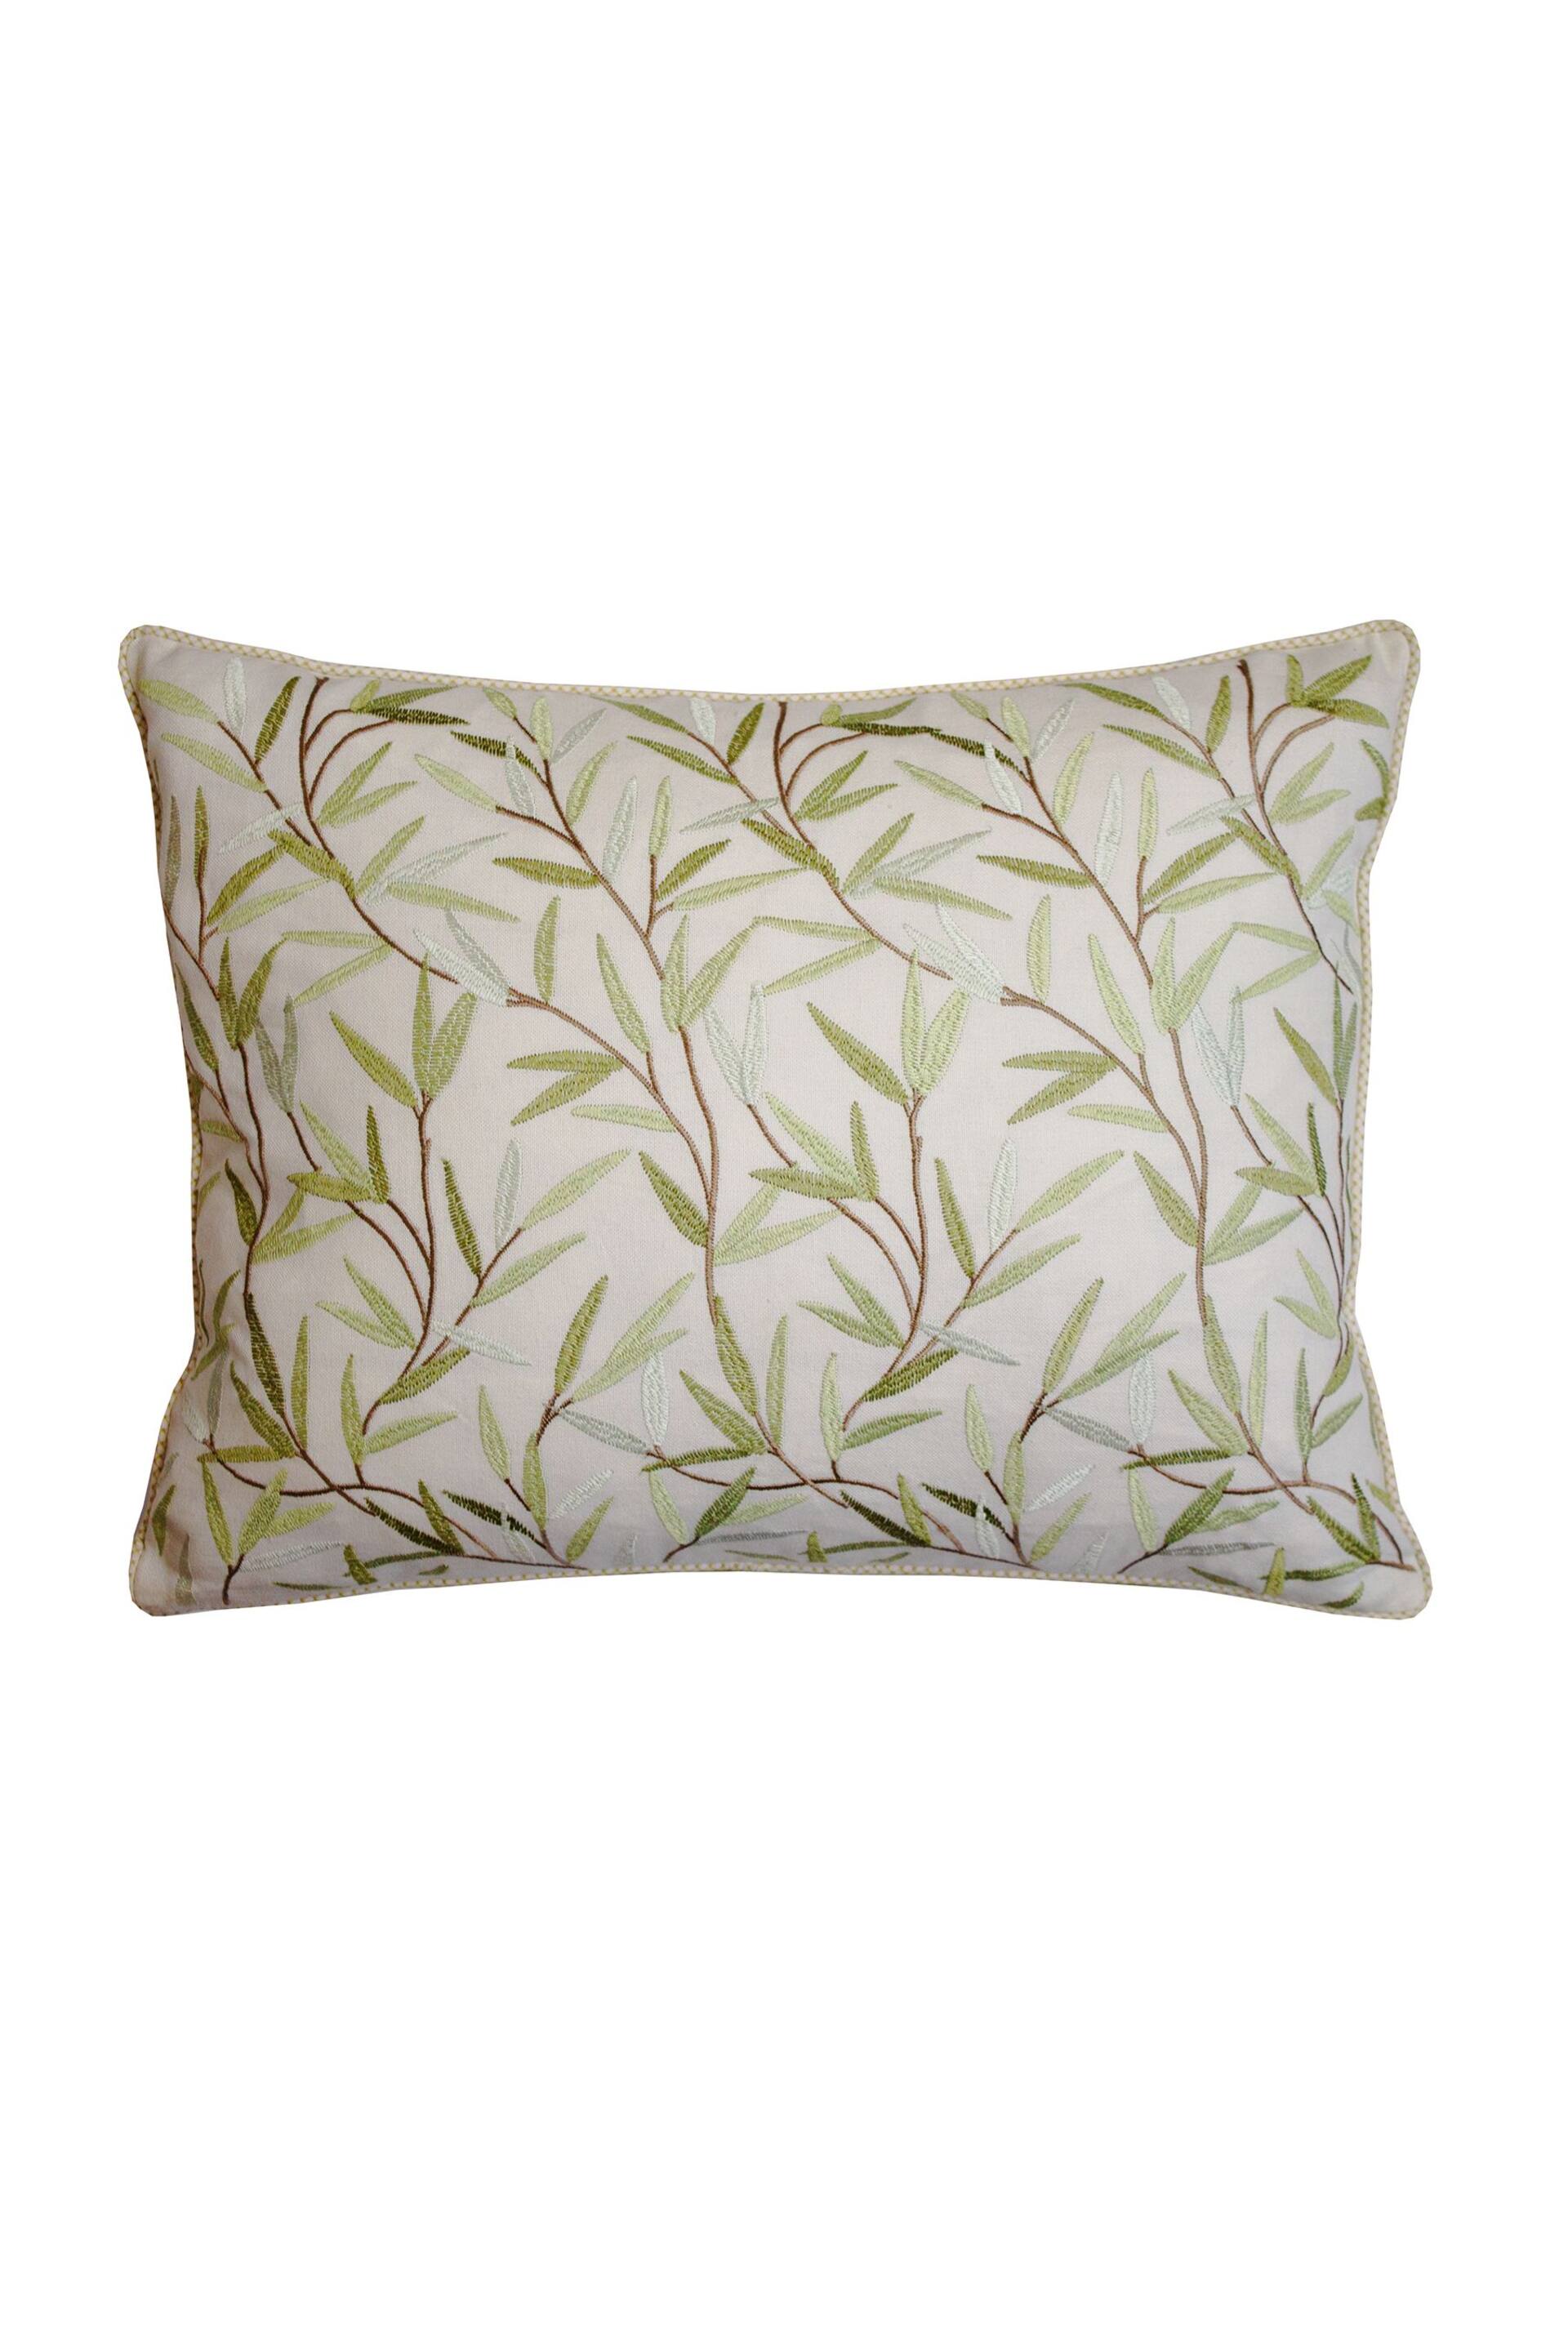 Laura Ashley Hedgerow Green Square Willow Leaf Hedgerow Cushion - Image 2 of 3